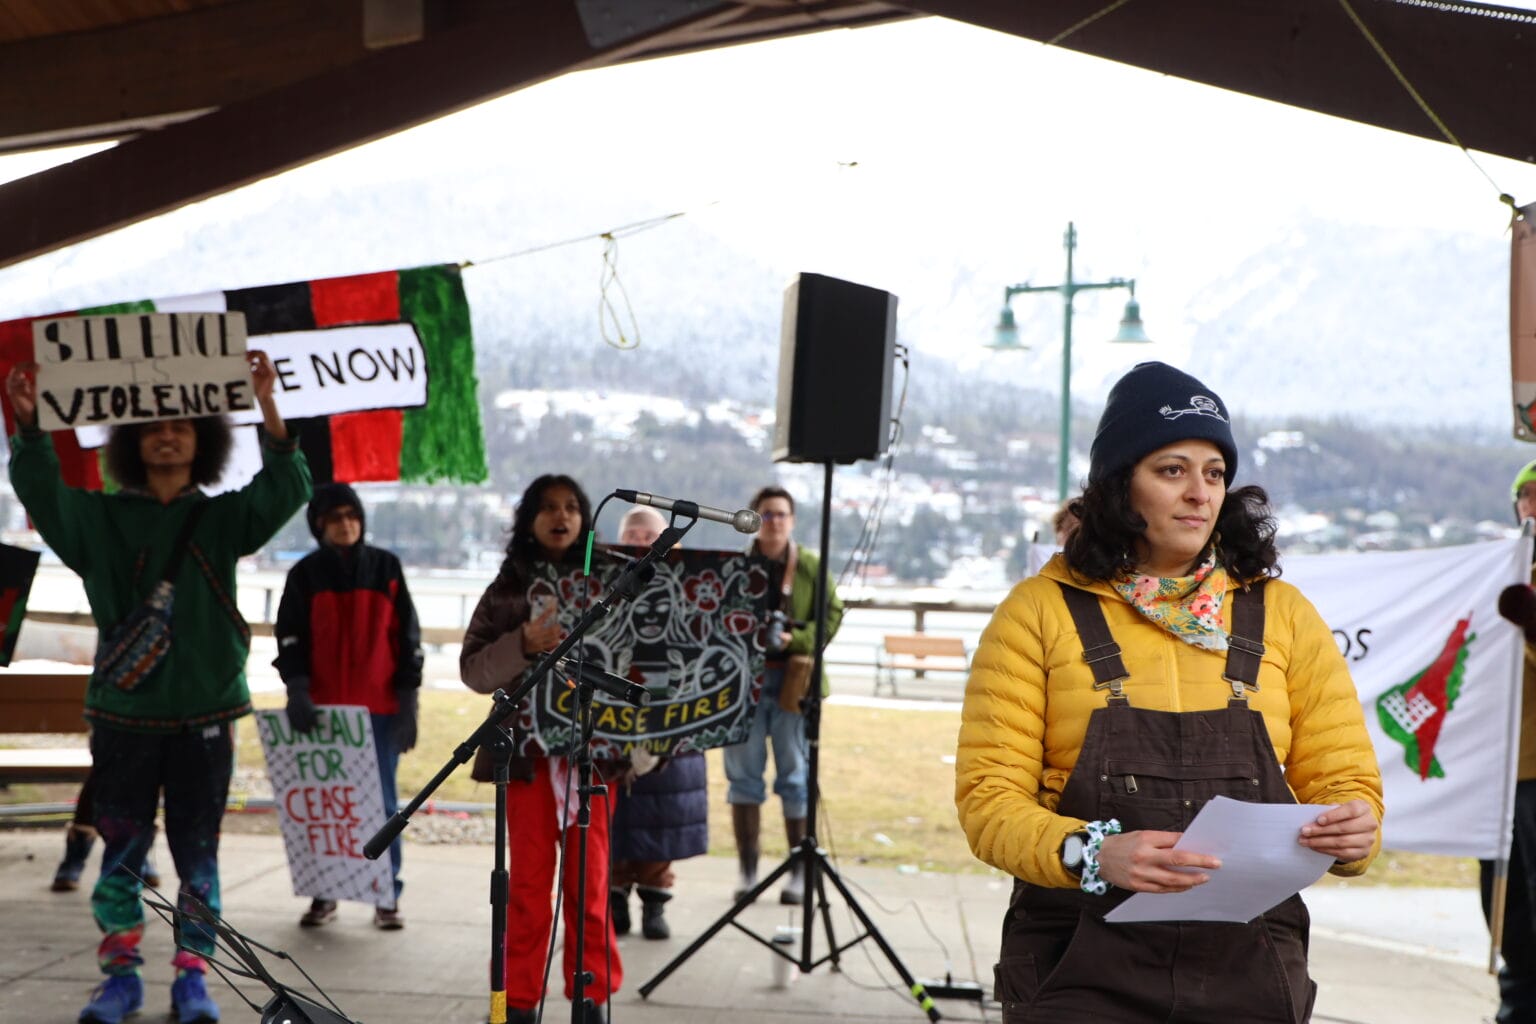 a woman holds a paper in front of a group that has signs that say Juneau for Cease Fire